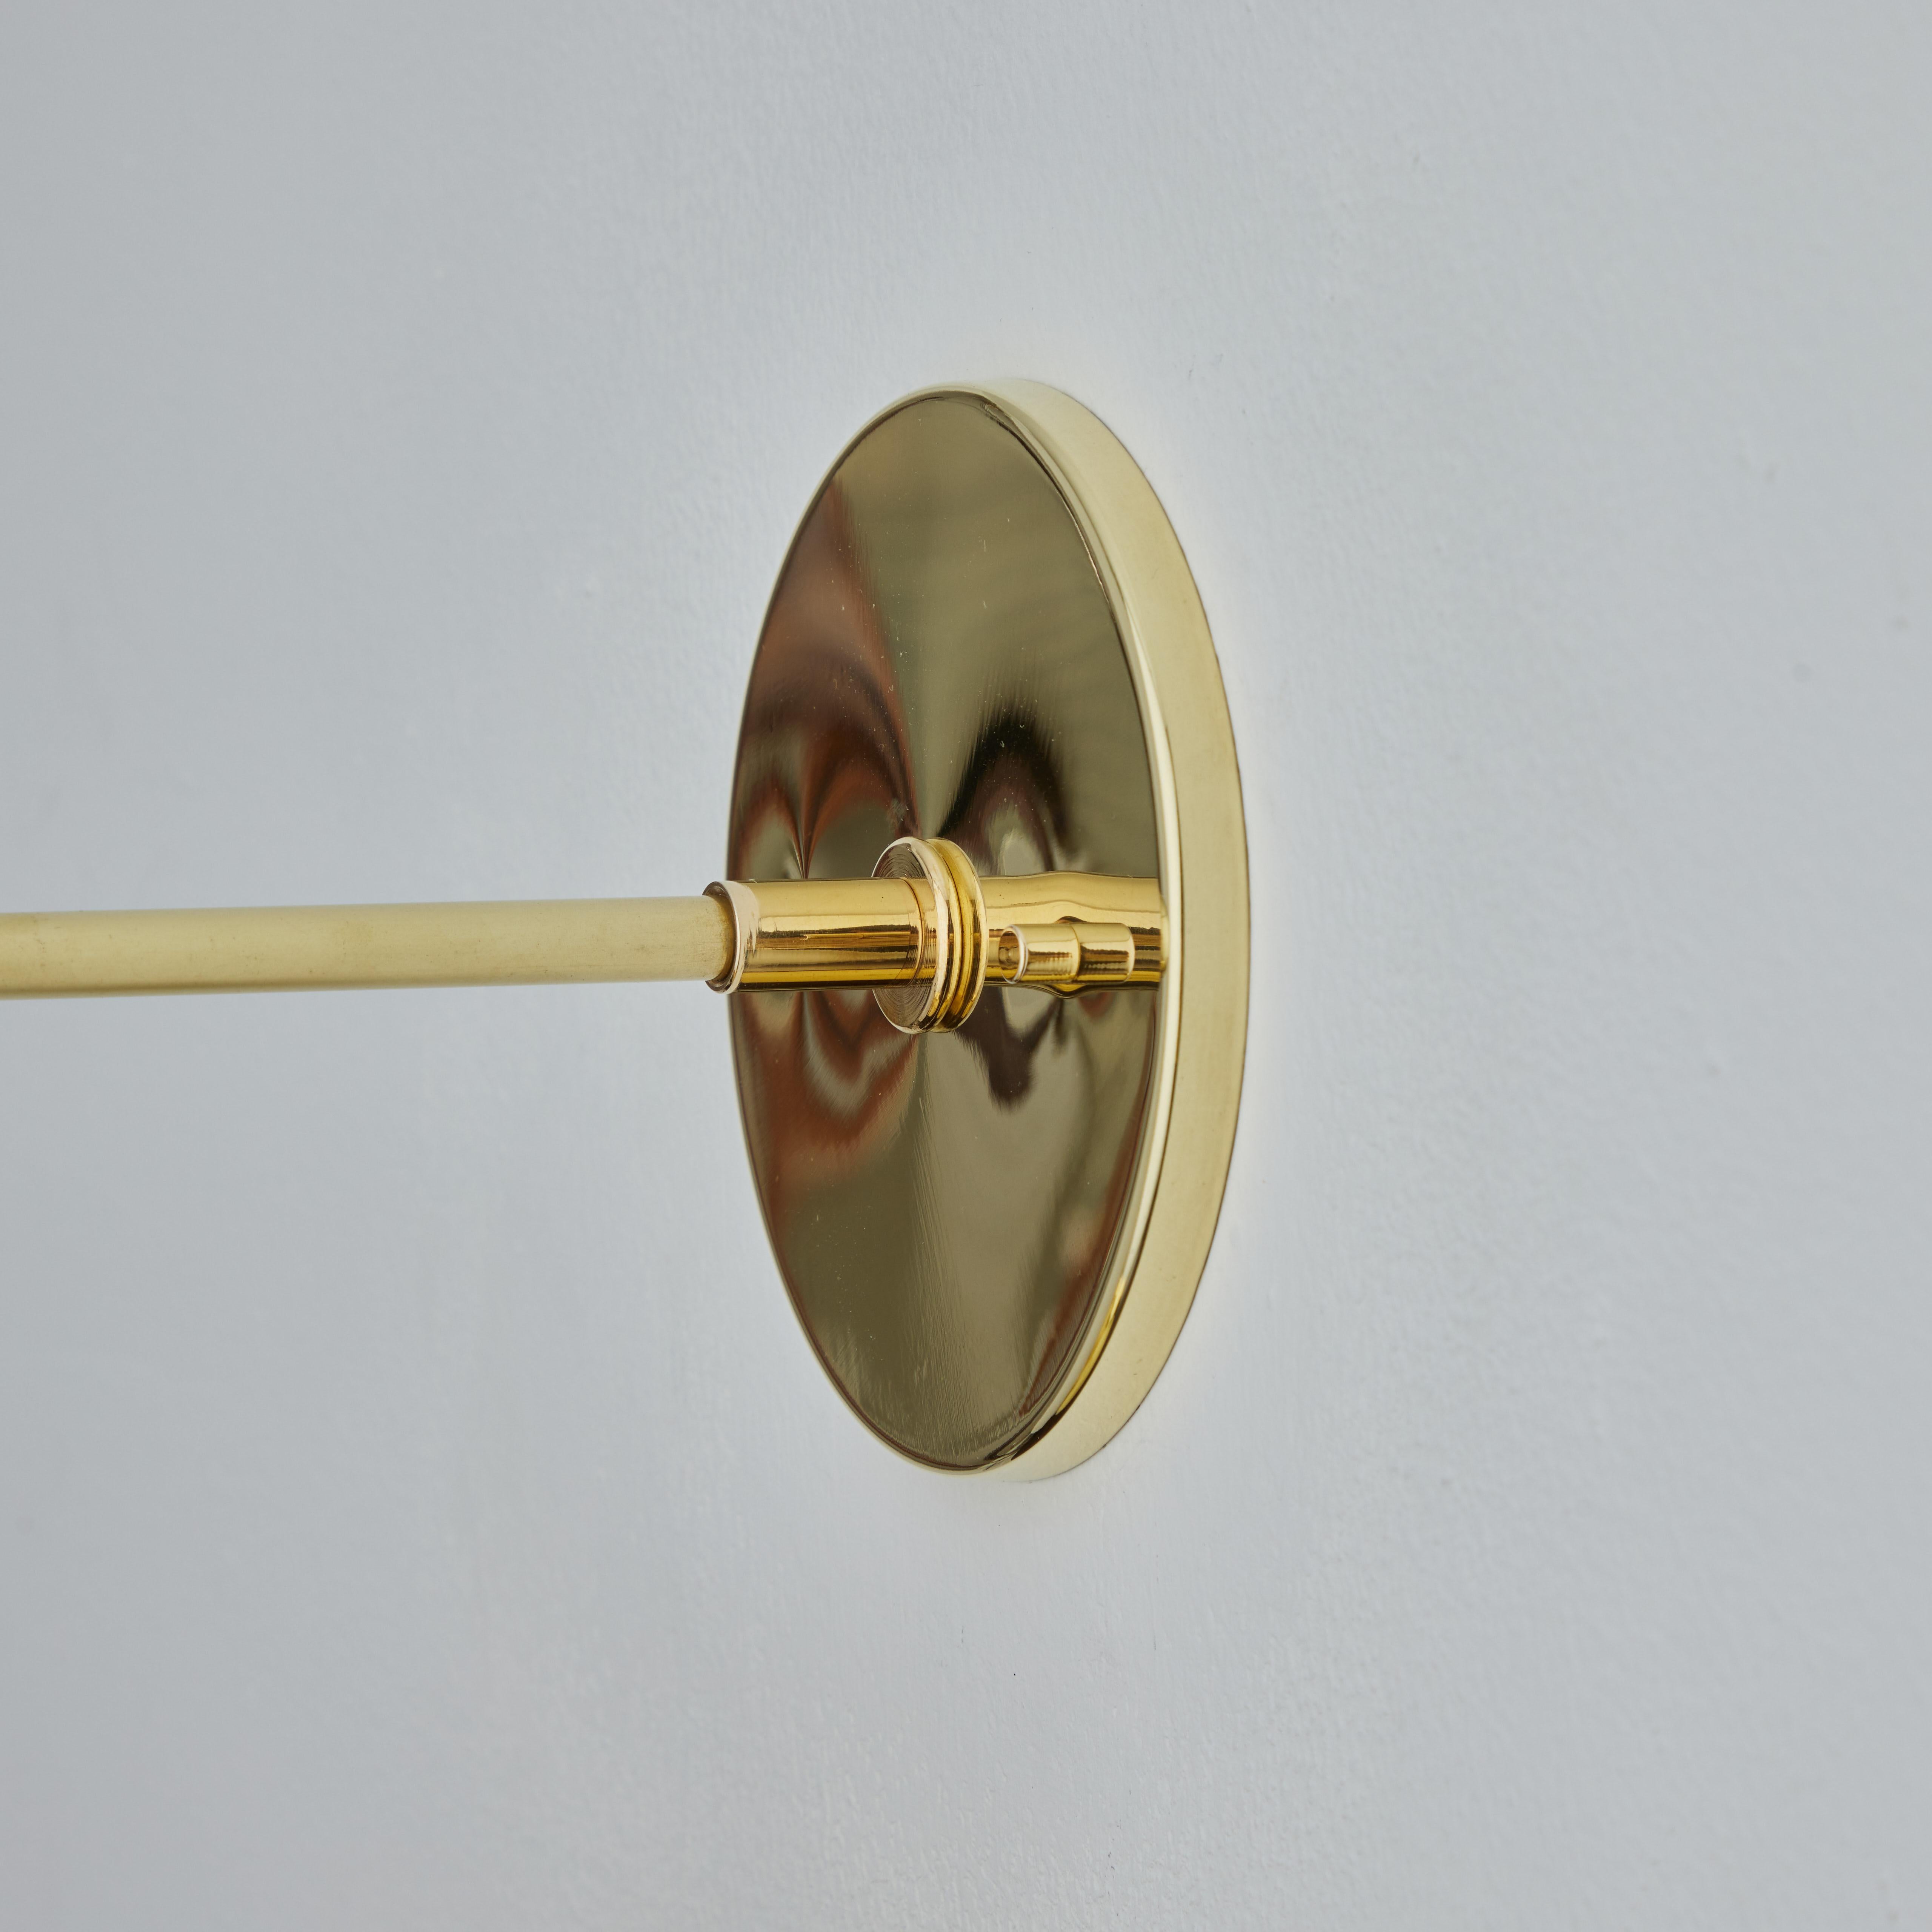 Alvar Aalto A330s Polished Brass Wall Light for Artek In New Condition For Sale In Glendale, CA